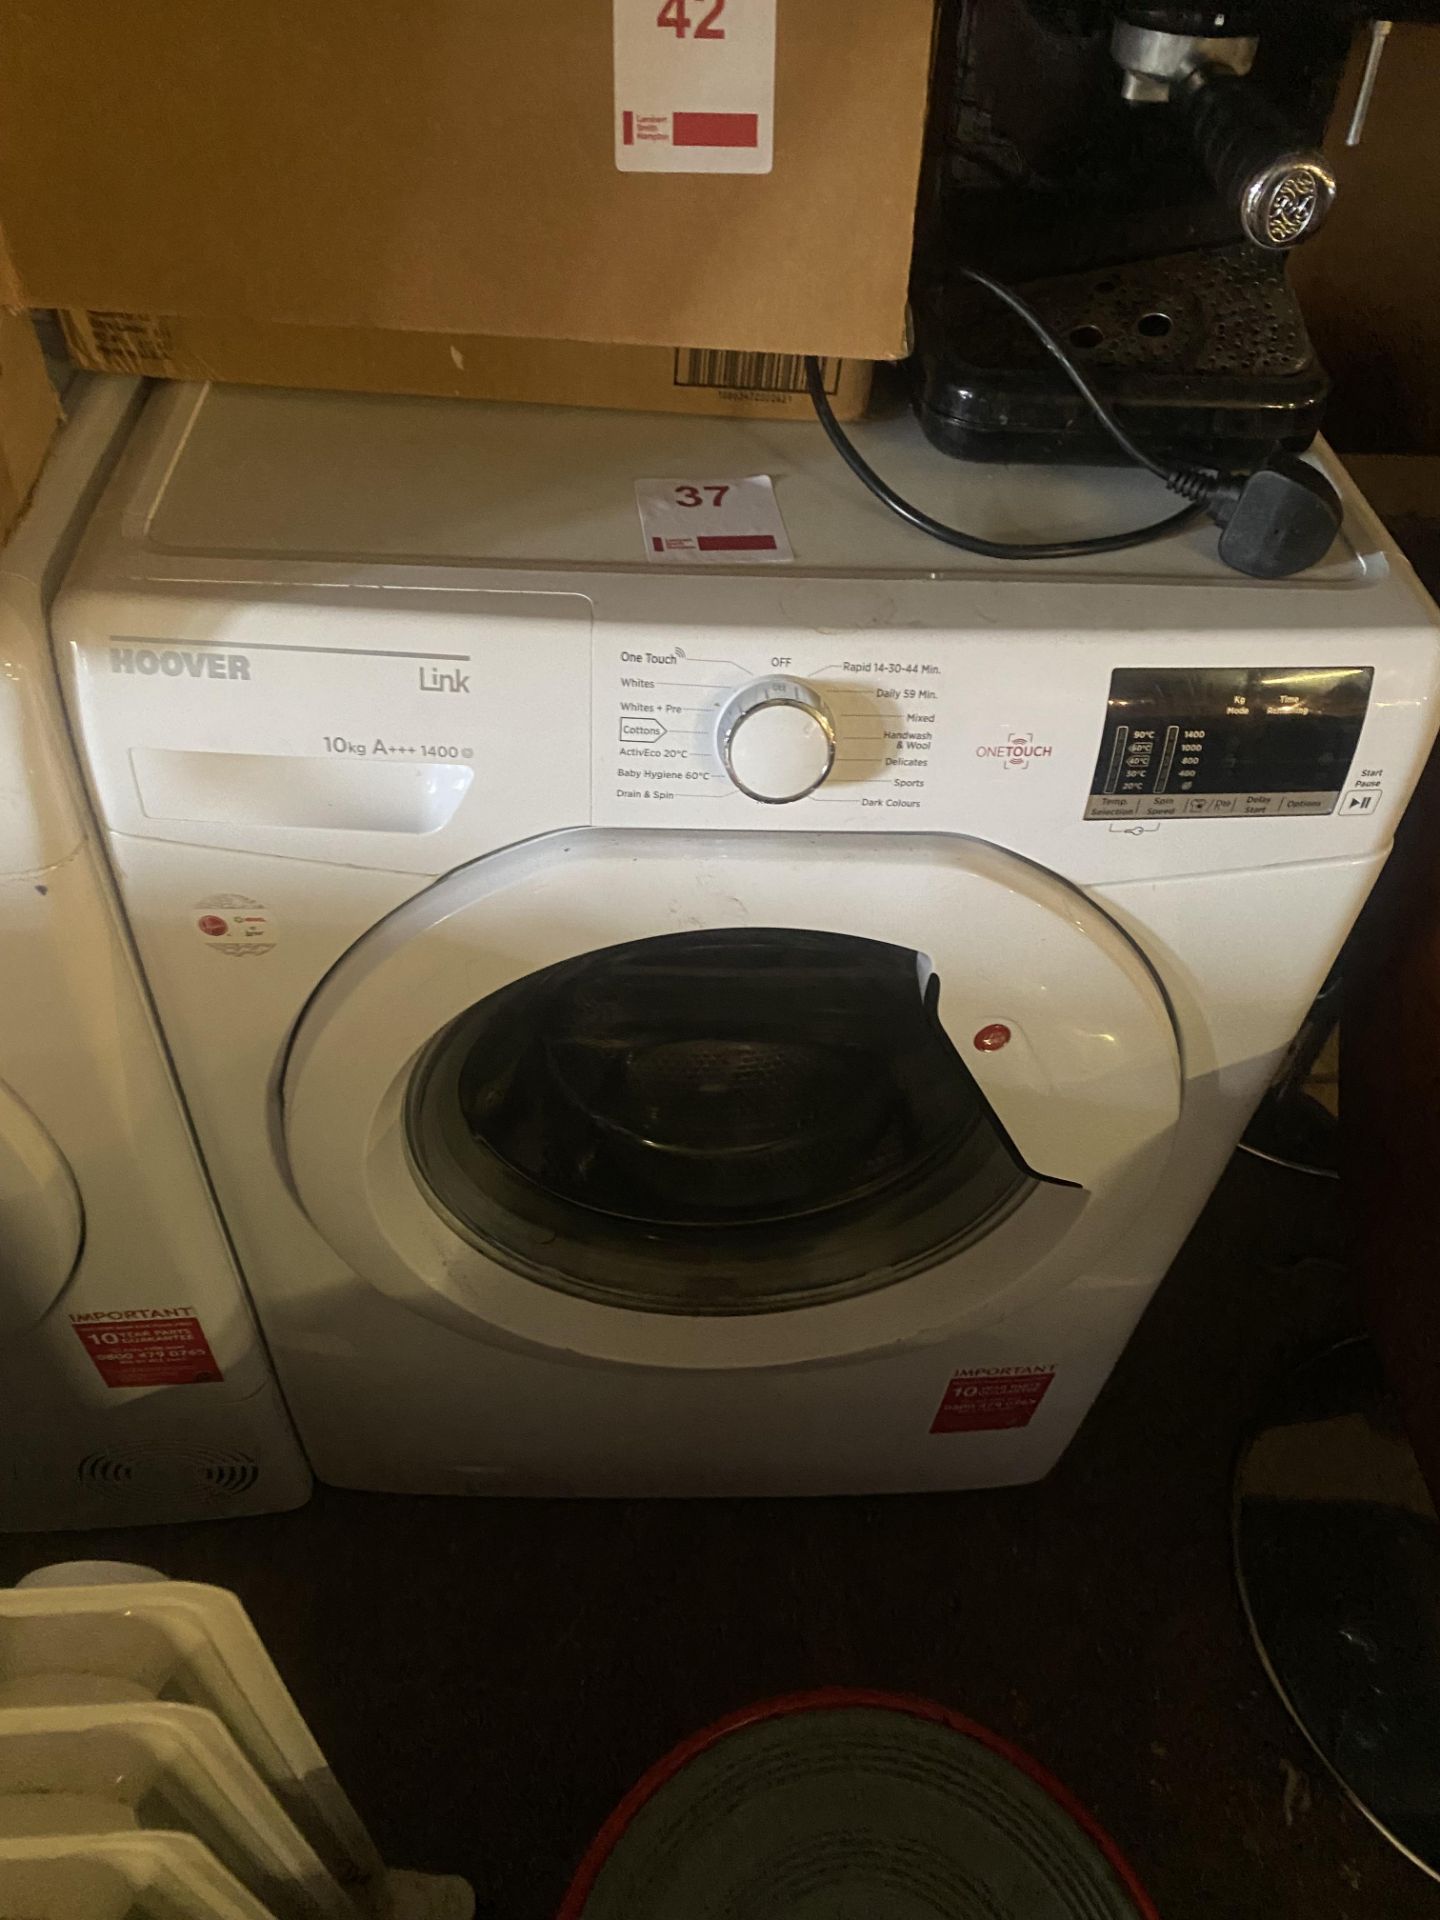 Hoover Link One Touch h10kg 1400spu washing machine and Hoover One Touch 10kg Dynamic Next tumble